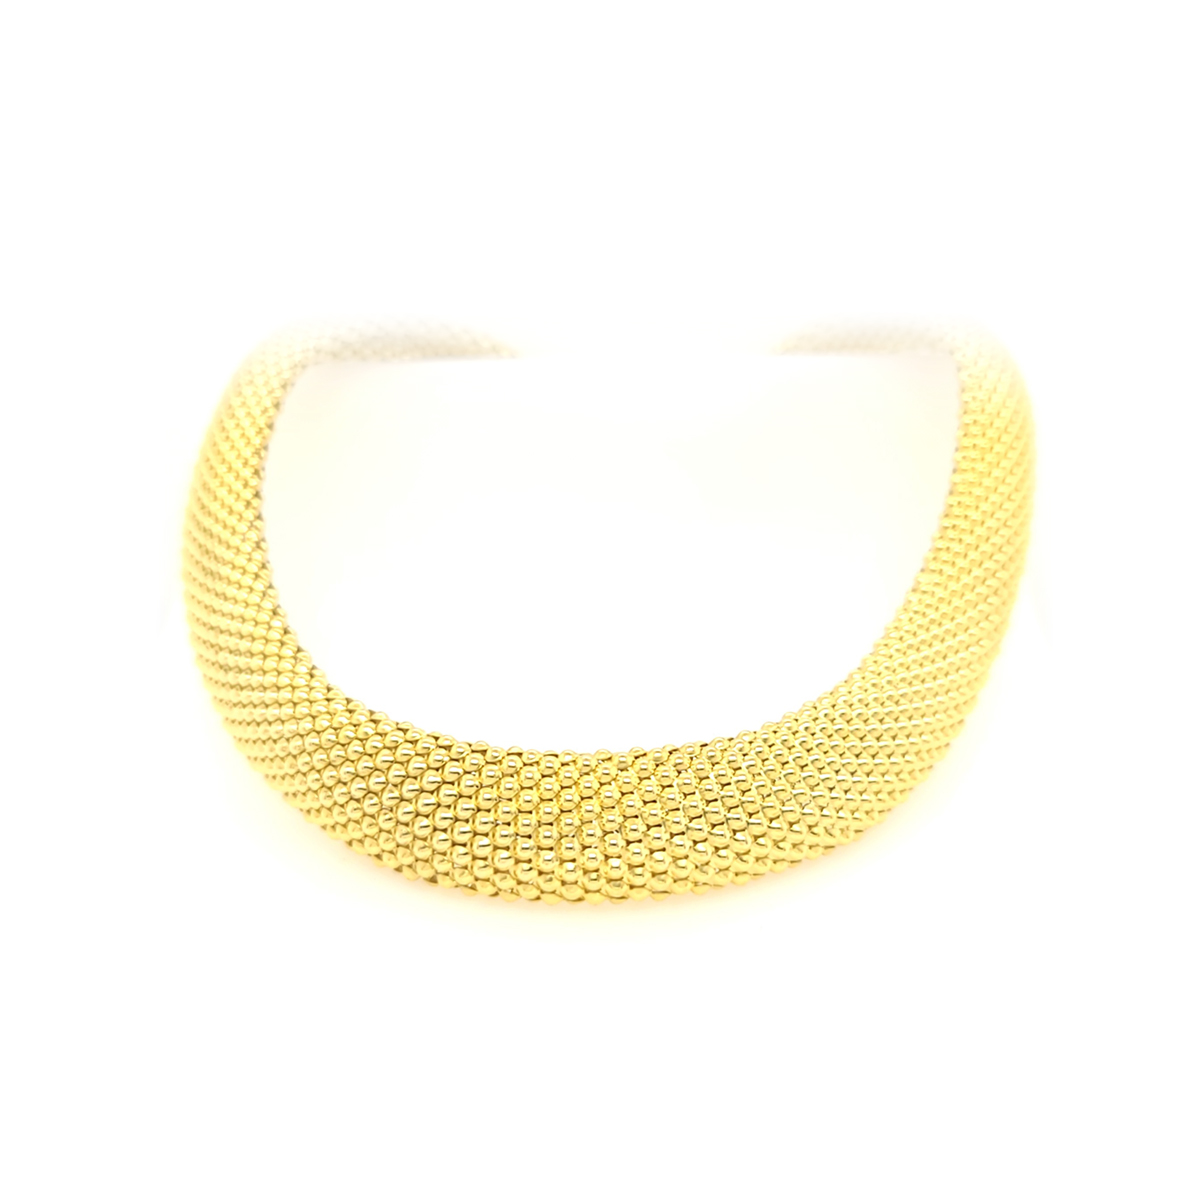 Vintage 18 Karat Yellow Gold Domed Beaded Choker Necklace